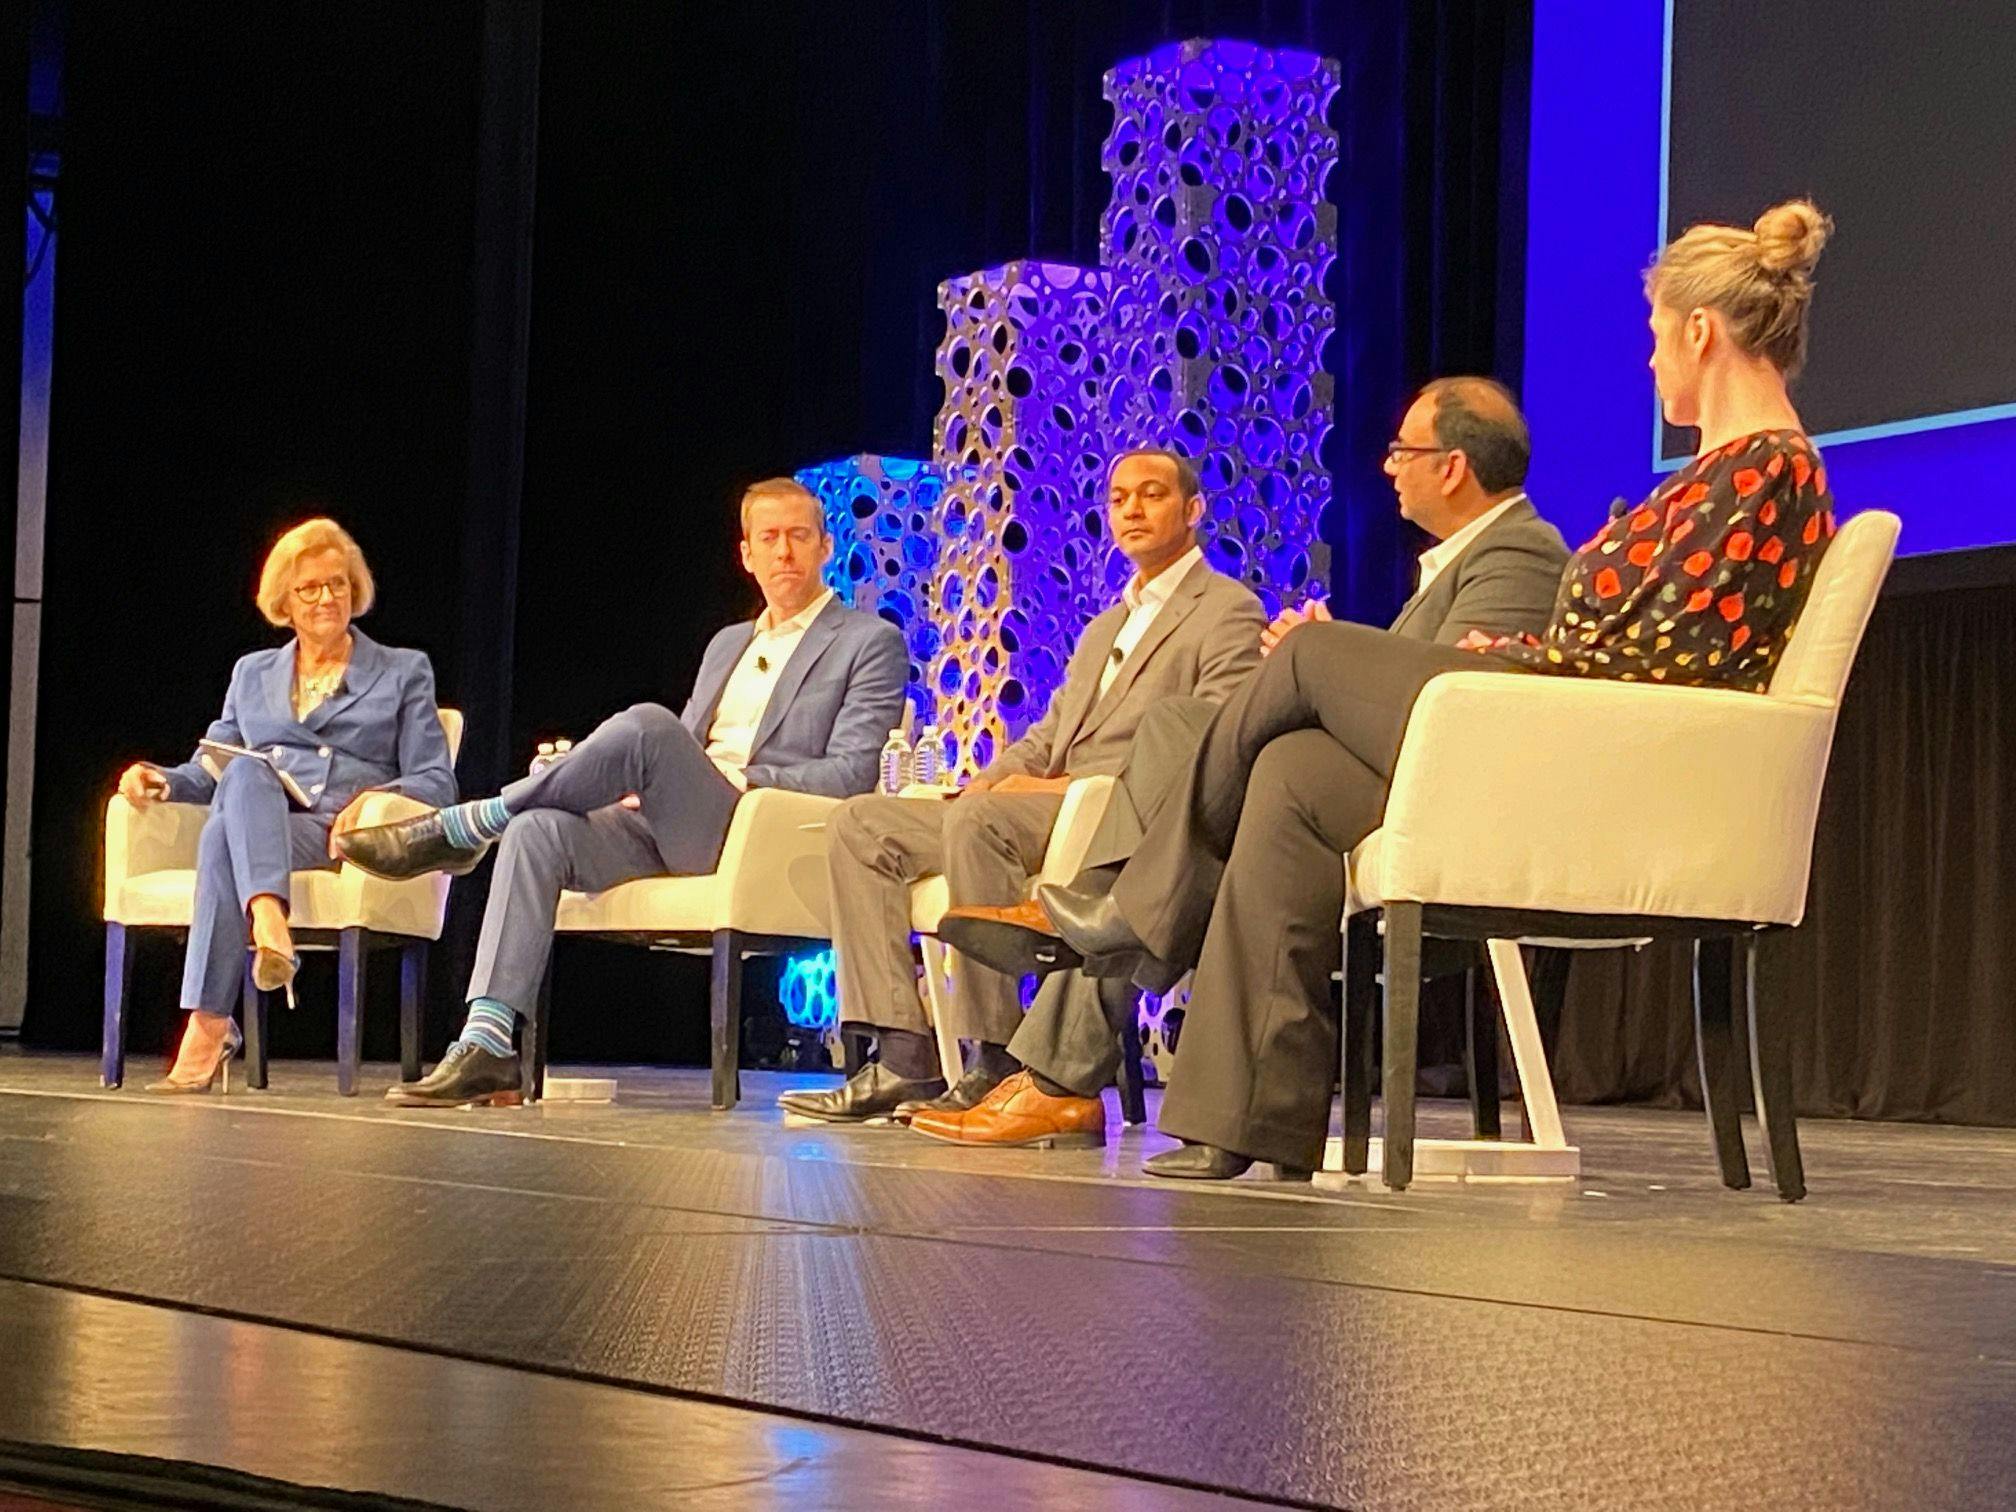 Panelists discuss the digital transformation of the healthcare industry at the HIMSS 2022 Global Health Conference & Exhibition. 